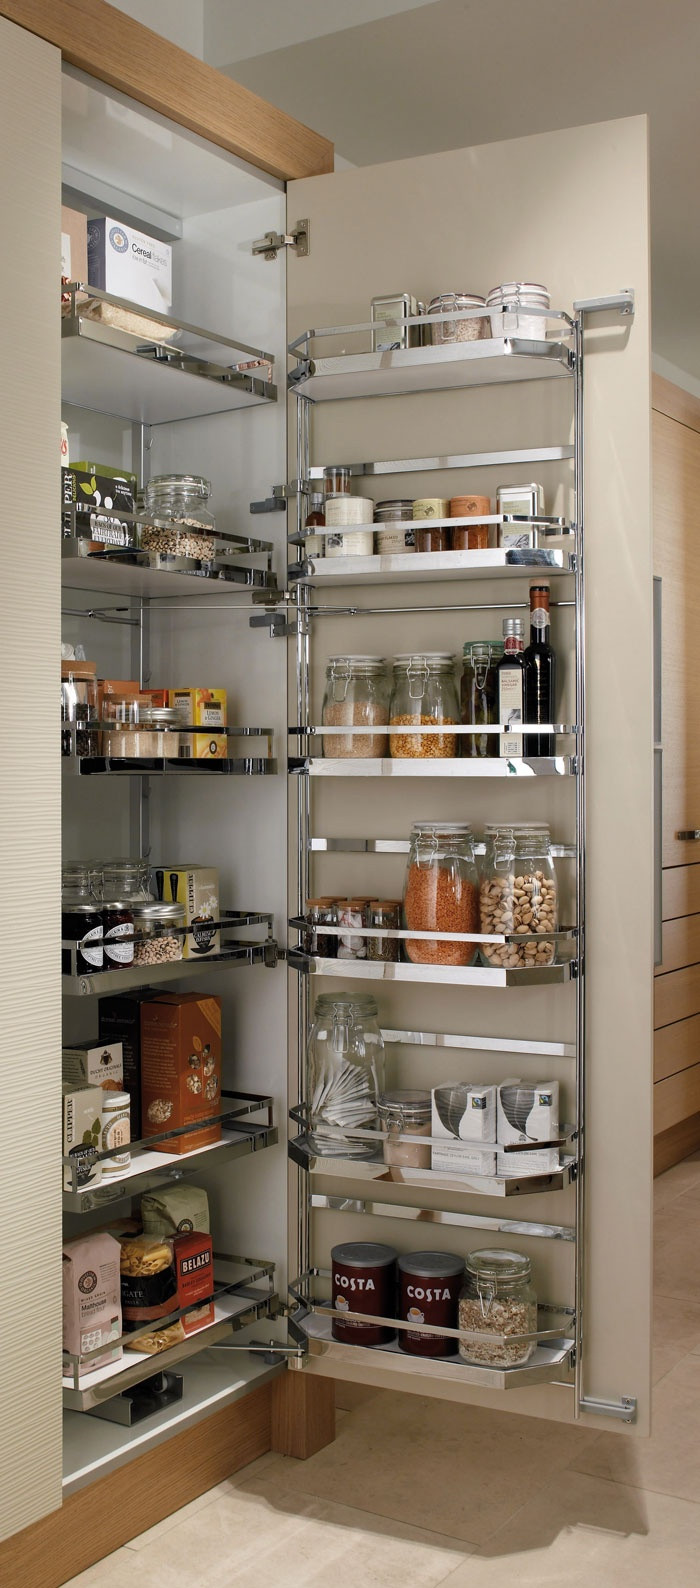 Pull Out Kitchen Storage
 31 Amazing Storage Ideas For Small Kitchens